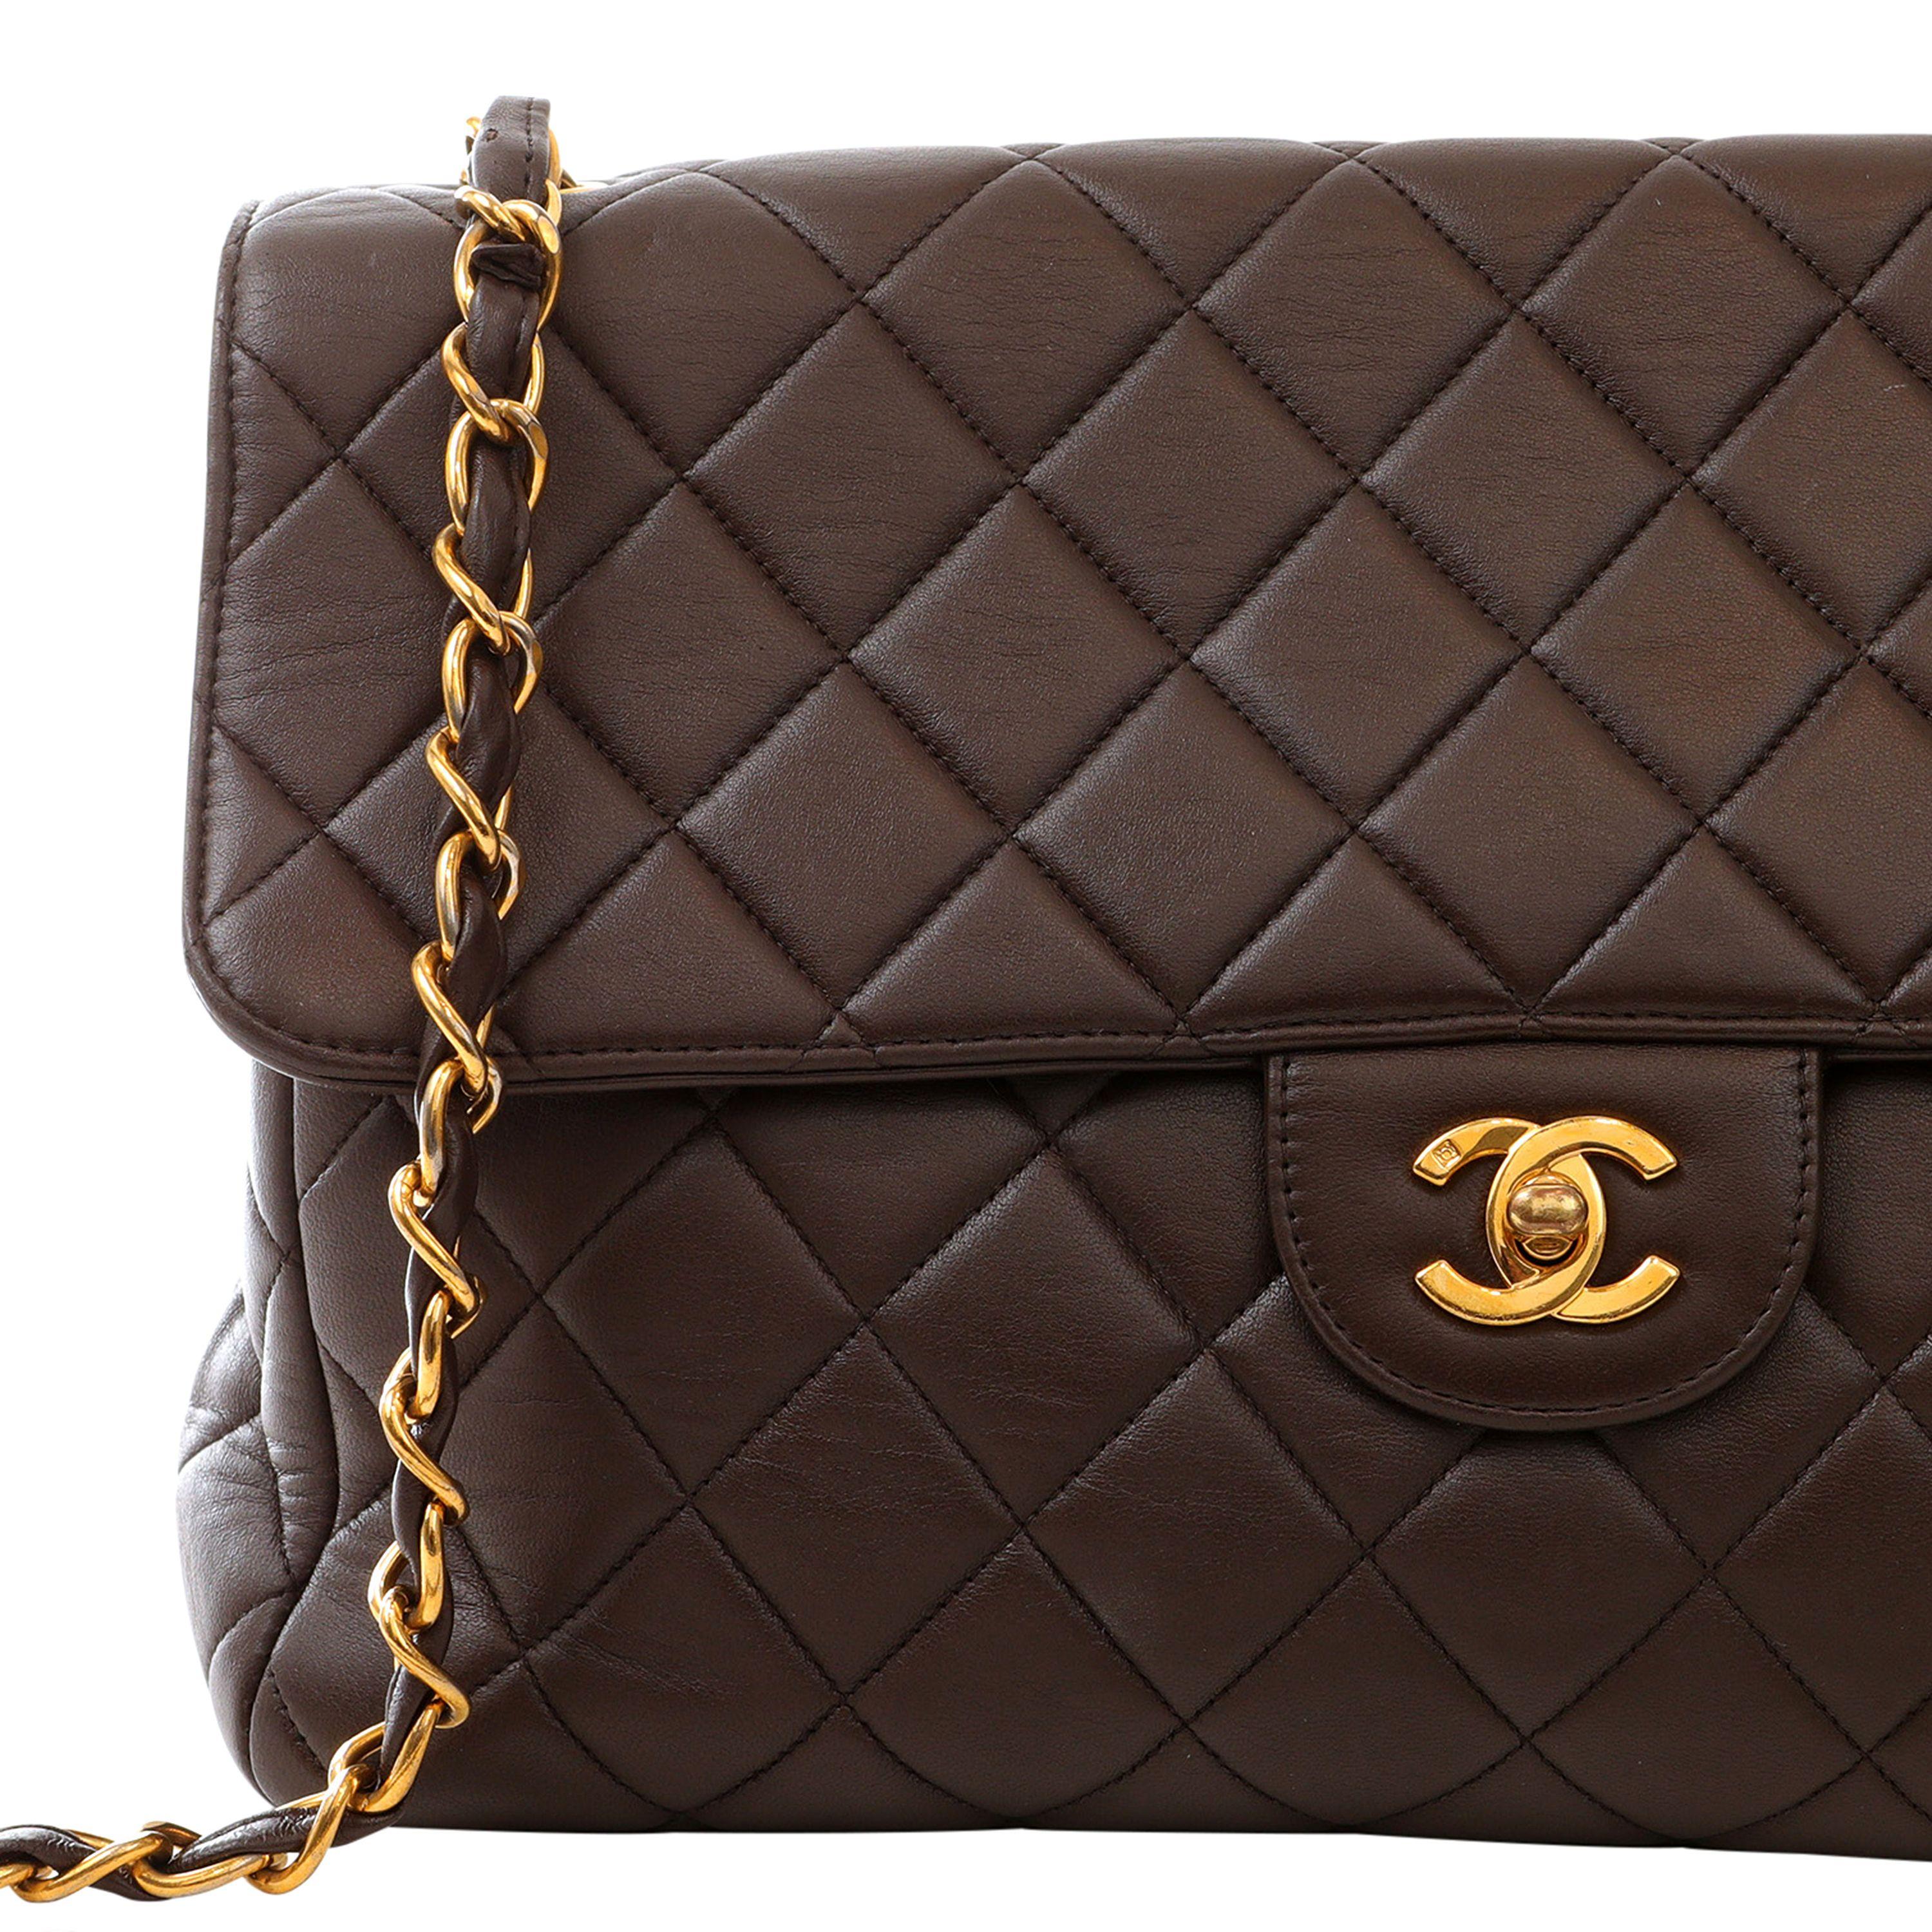 This authentic Chanel Chocolate Brown Lambskin Jumbo Classic is in excellent plus vintage condition.  Supple chocolate lambskin is quilted in signature Chanel diamond pattern.  Gold interlocking CC twist lock.  Chain strap may be carried single or